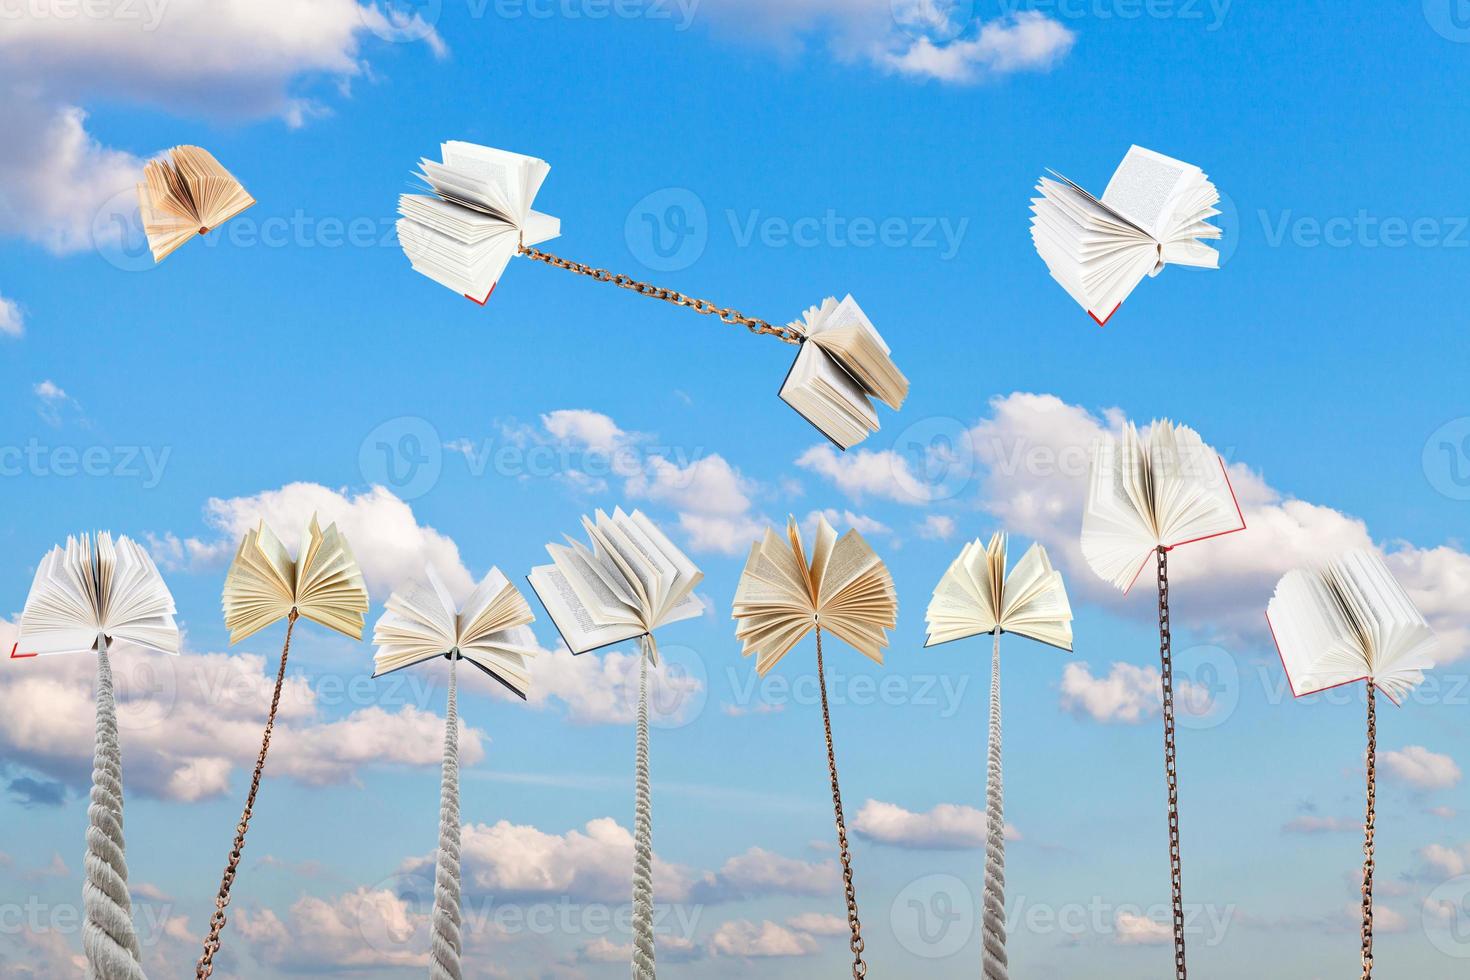 set of book tied on ropes and chains with blue sky photo